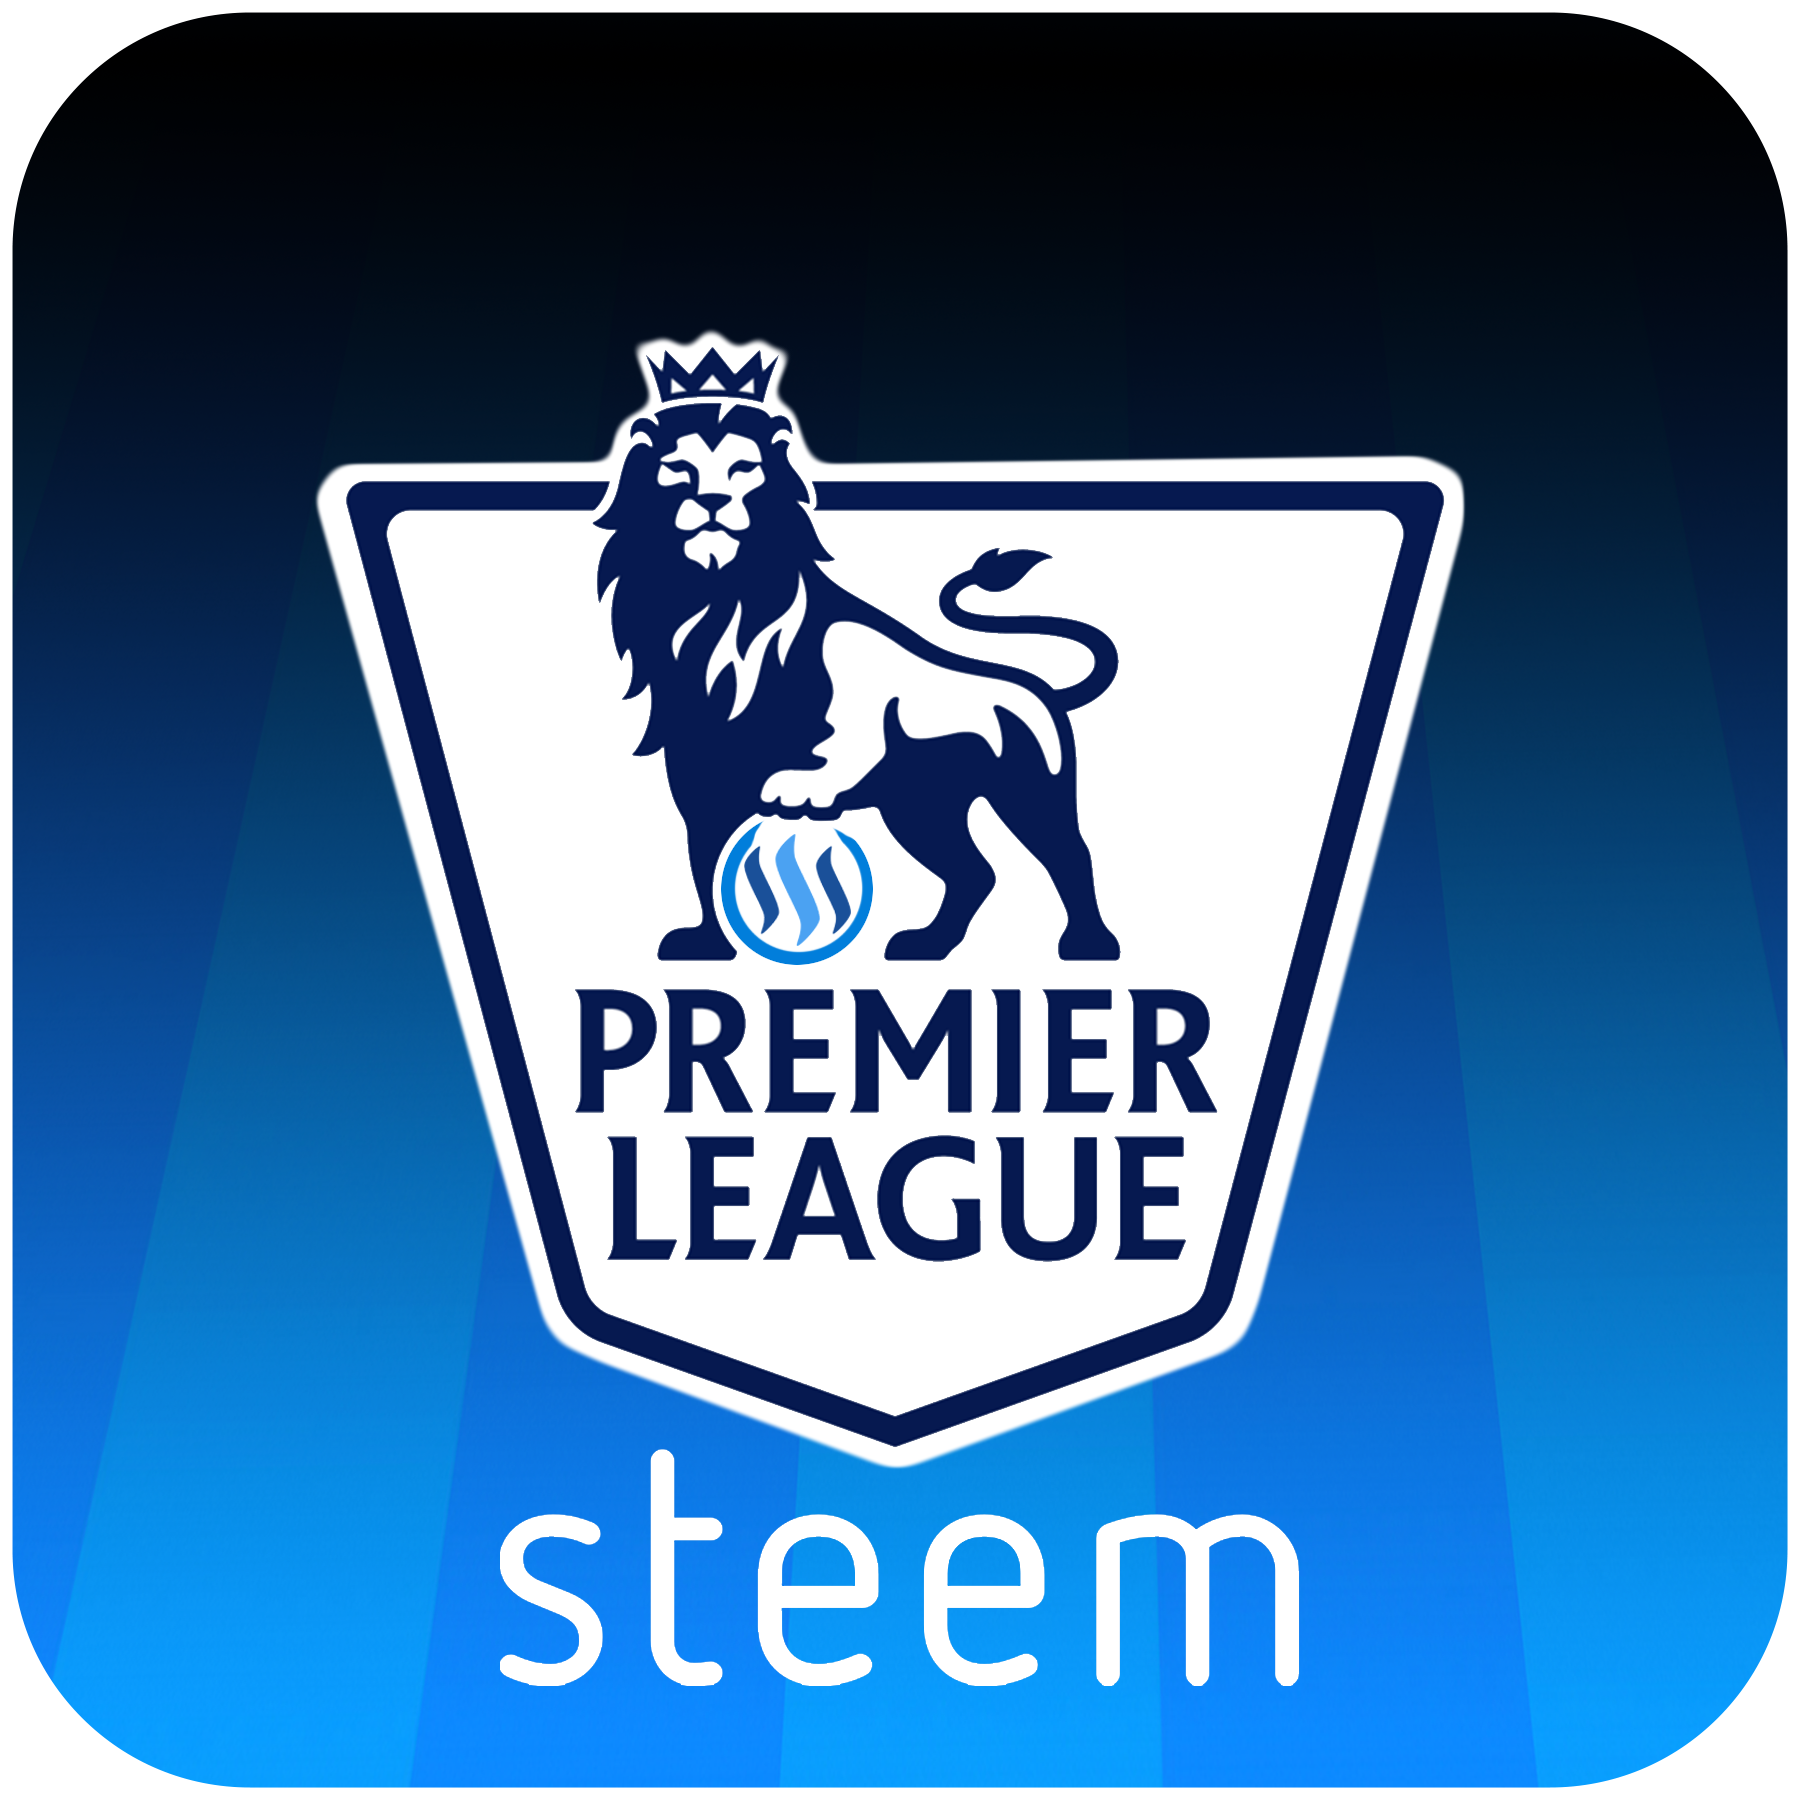 Steem Fantasy Premier League - Gameweek 32 Review and Match Prediction Game! — Steemkr